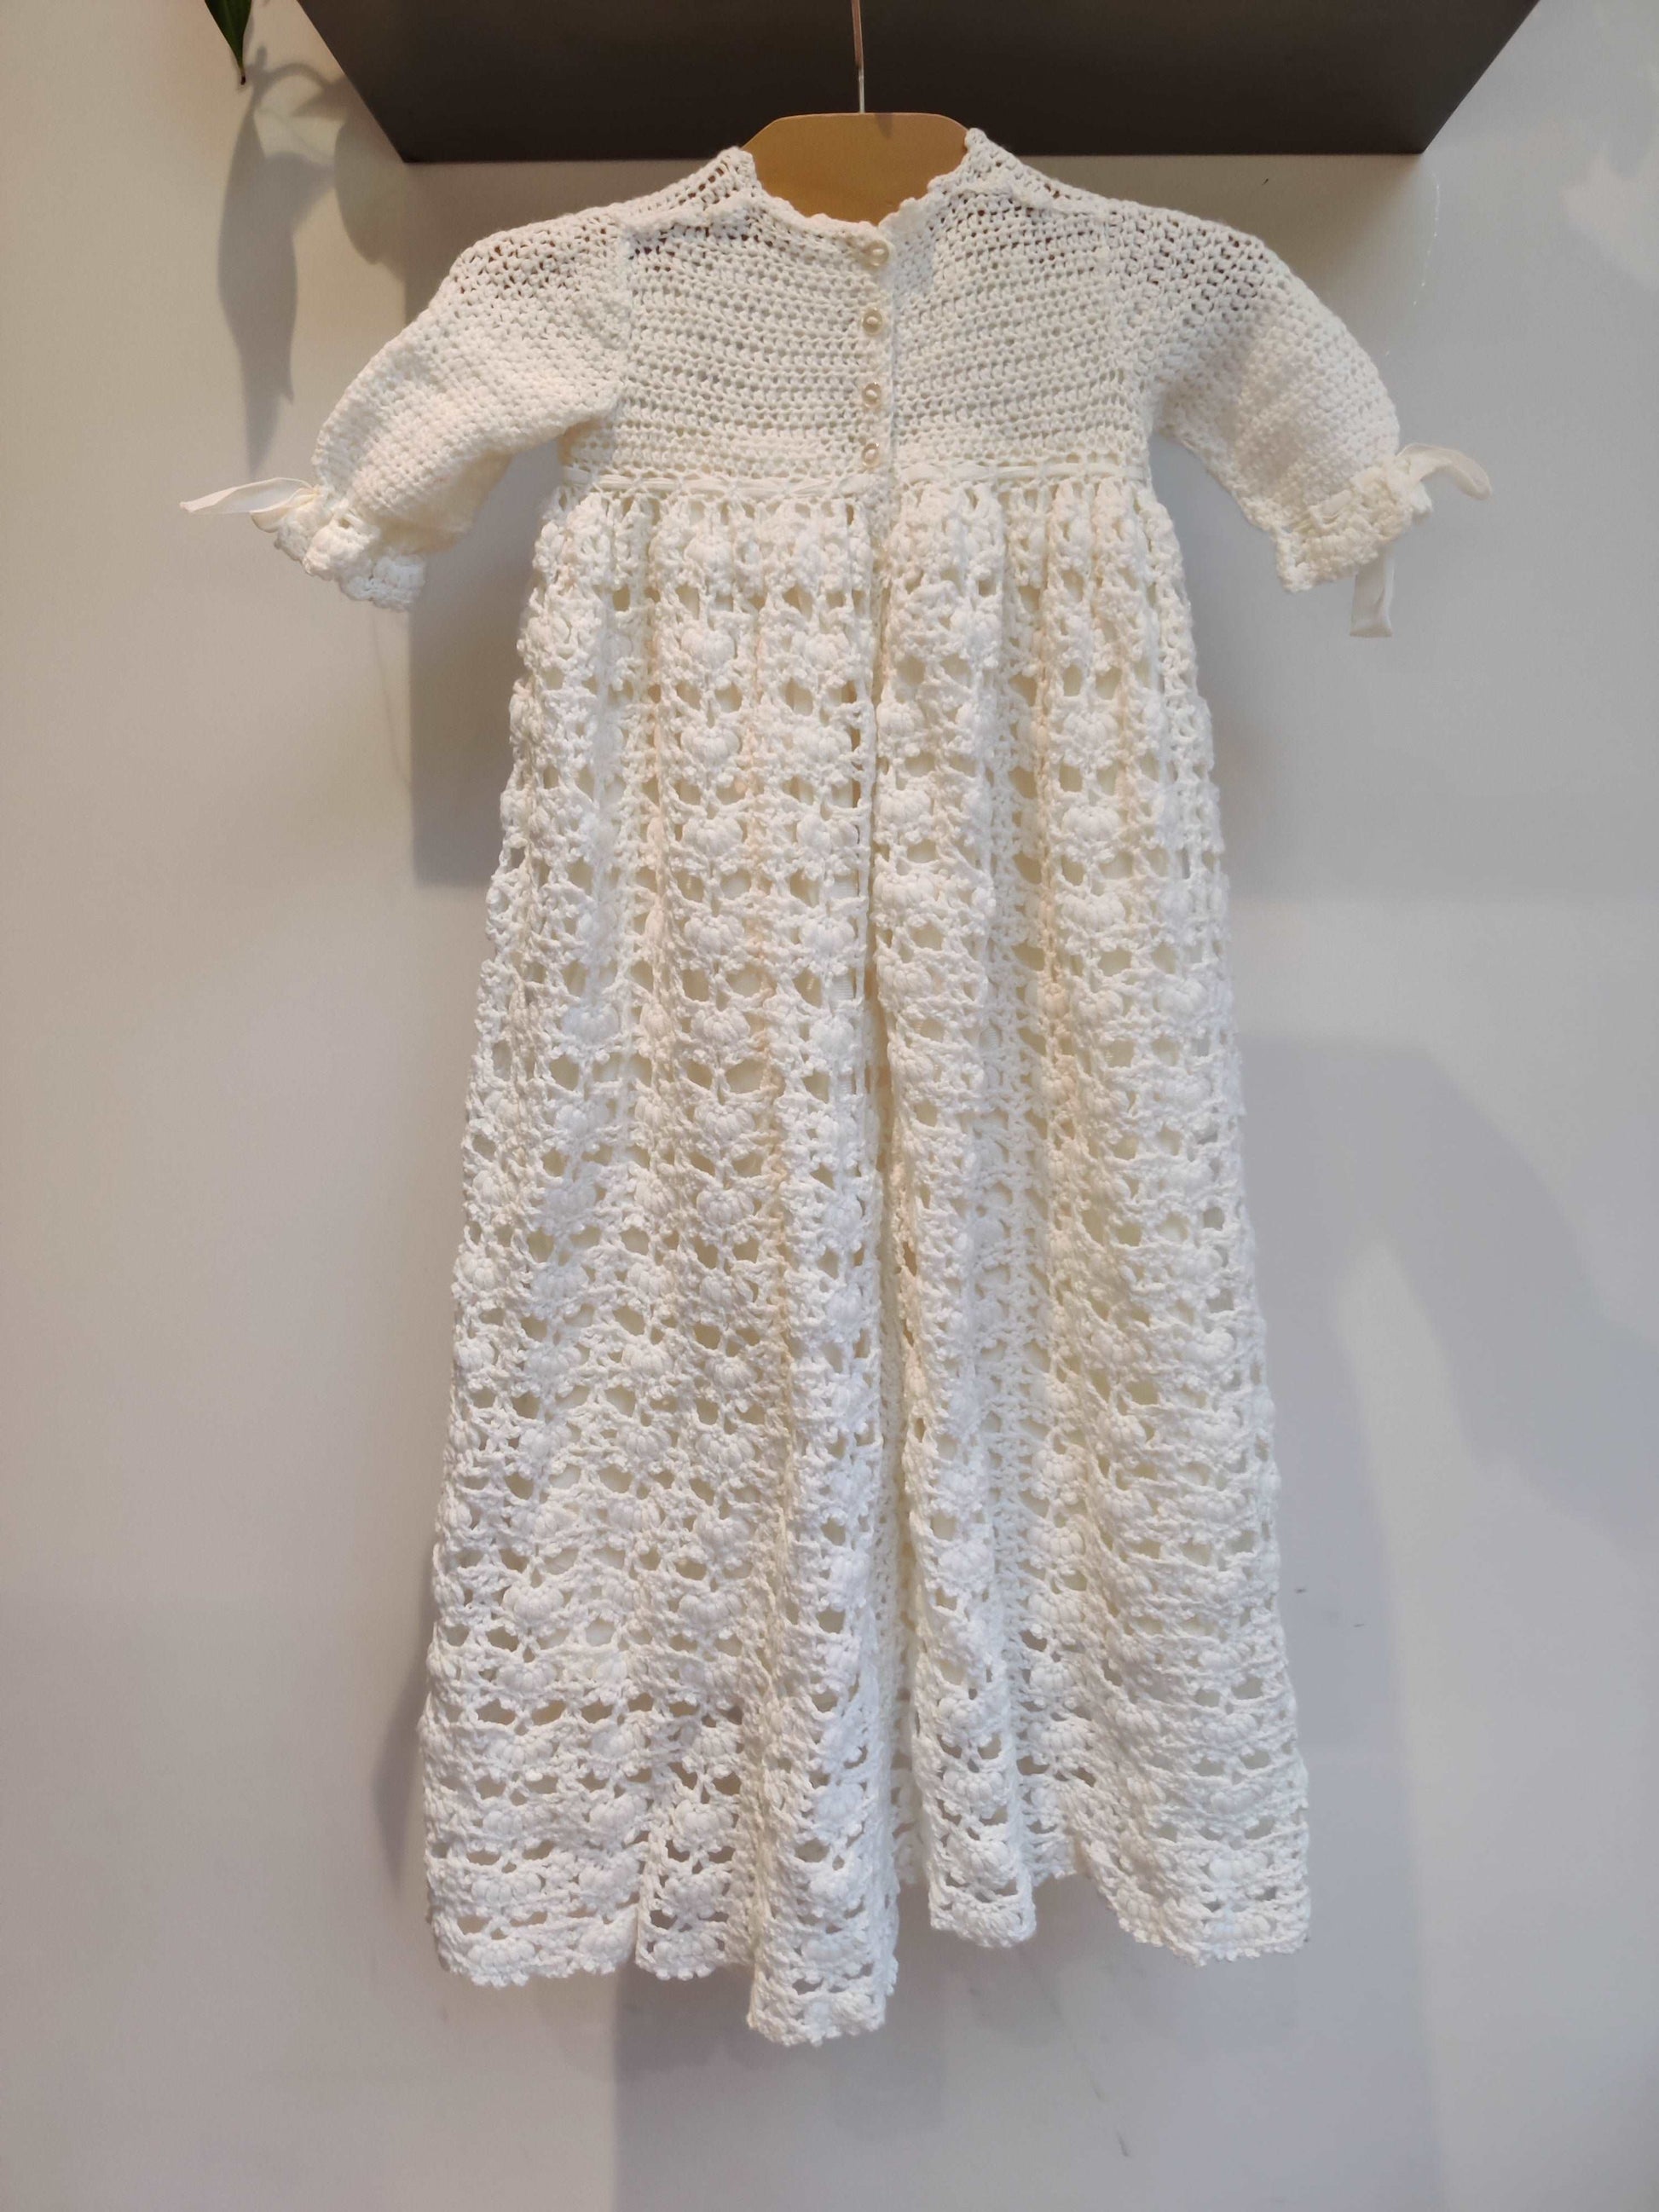 Vintage christening dress in crocheted style